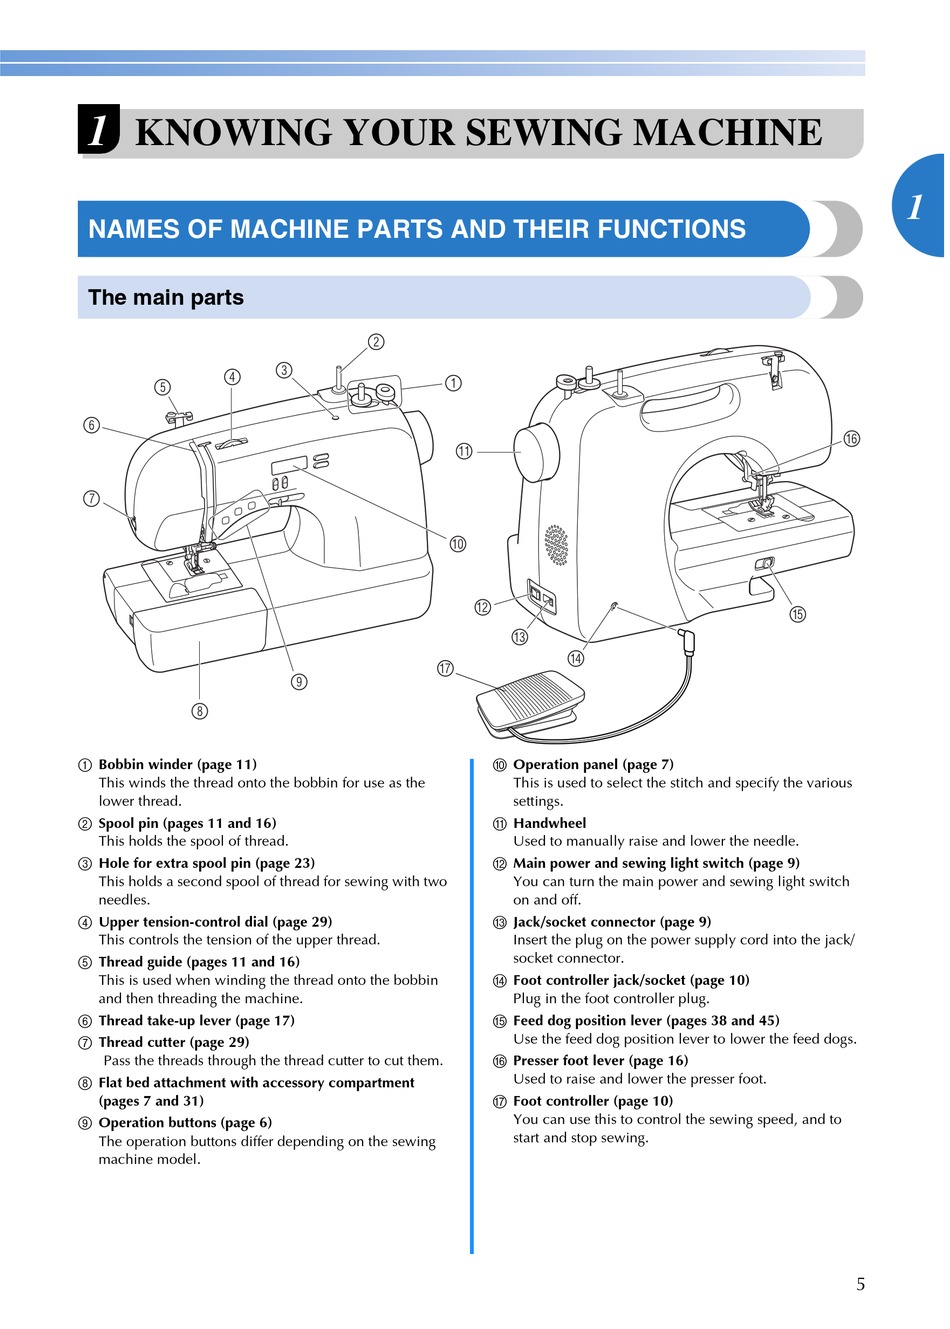 Knowing Your Sewing Machine; Names Of Machine Parts And Their